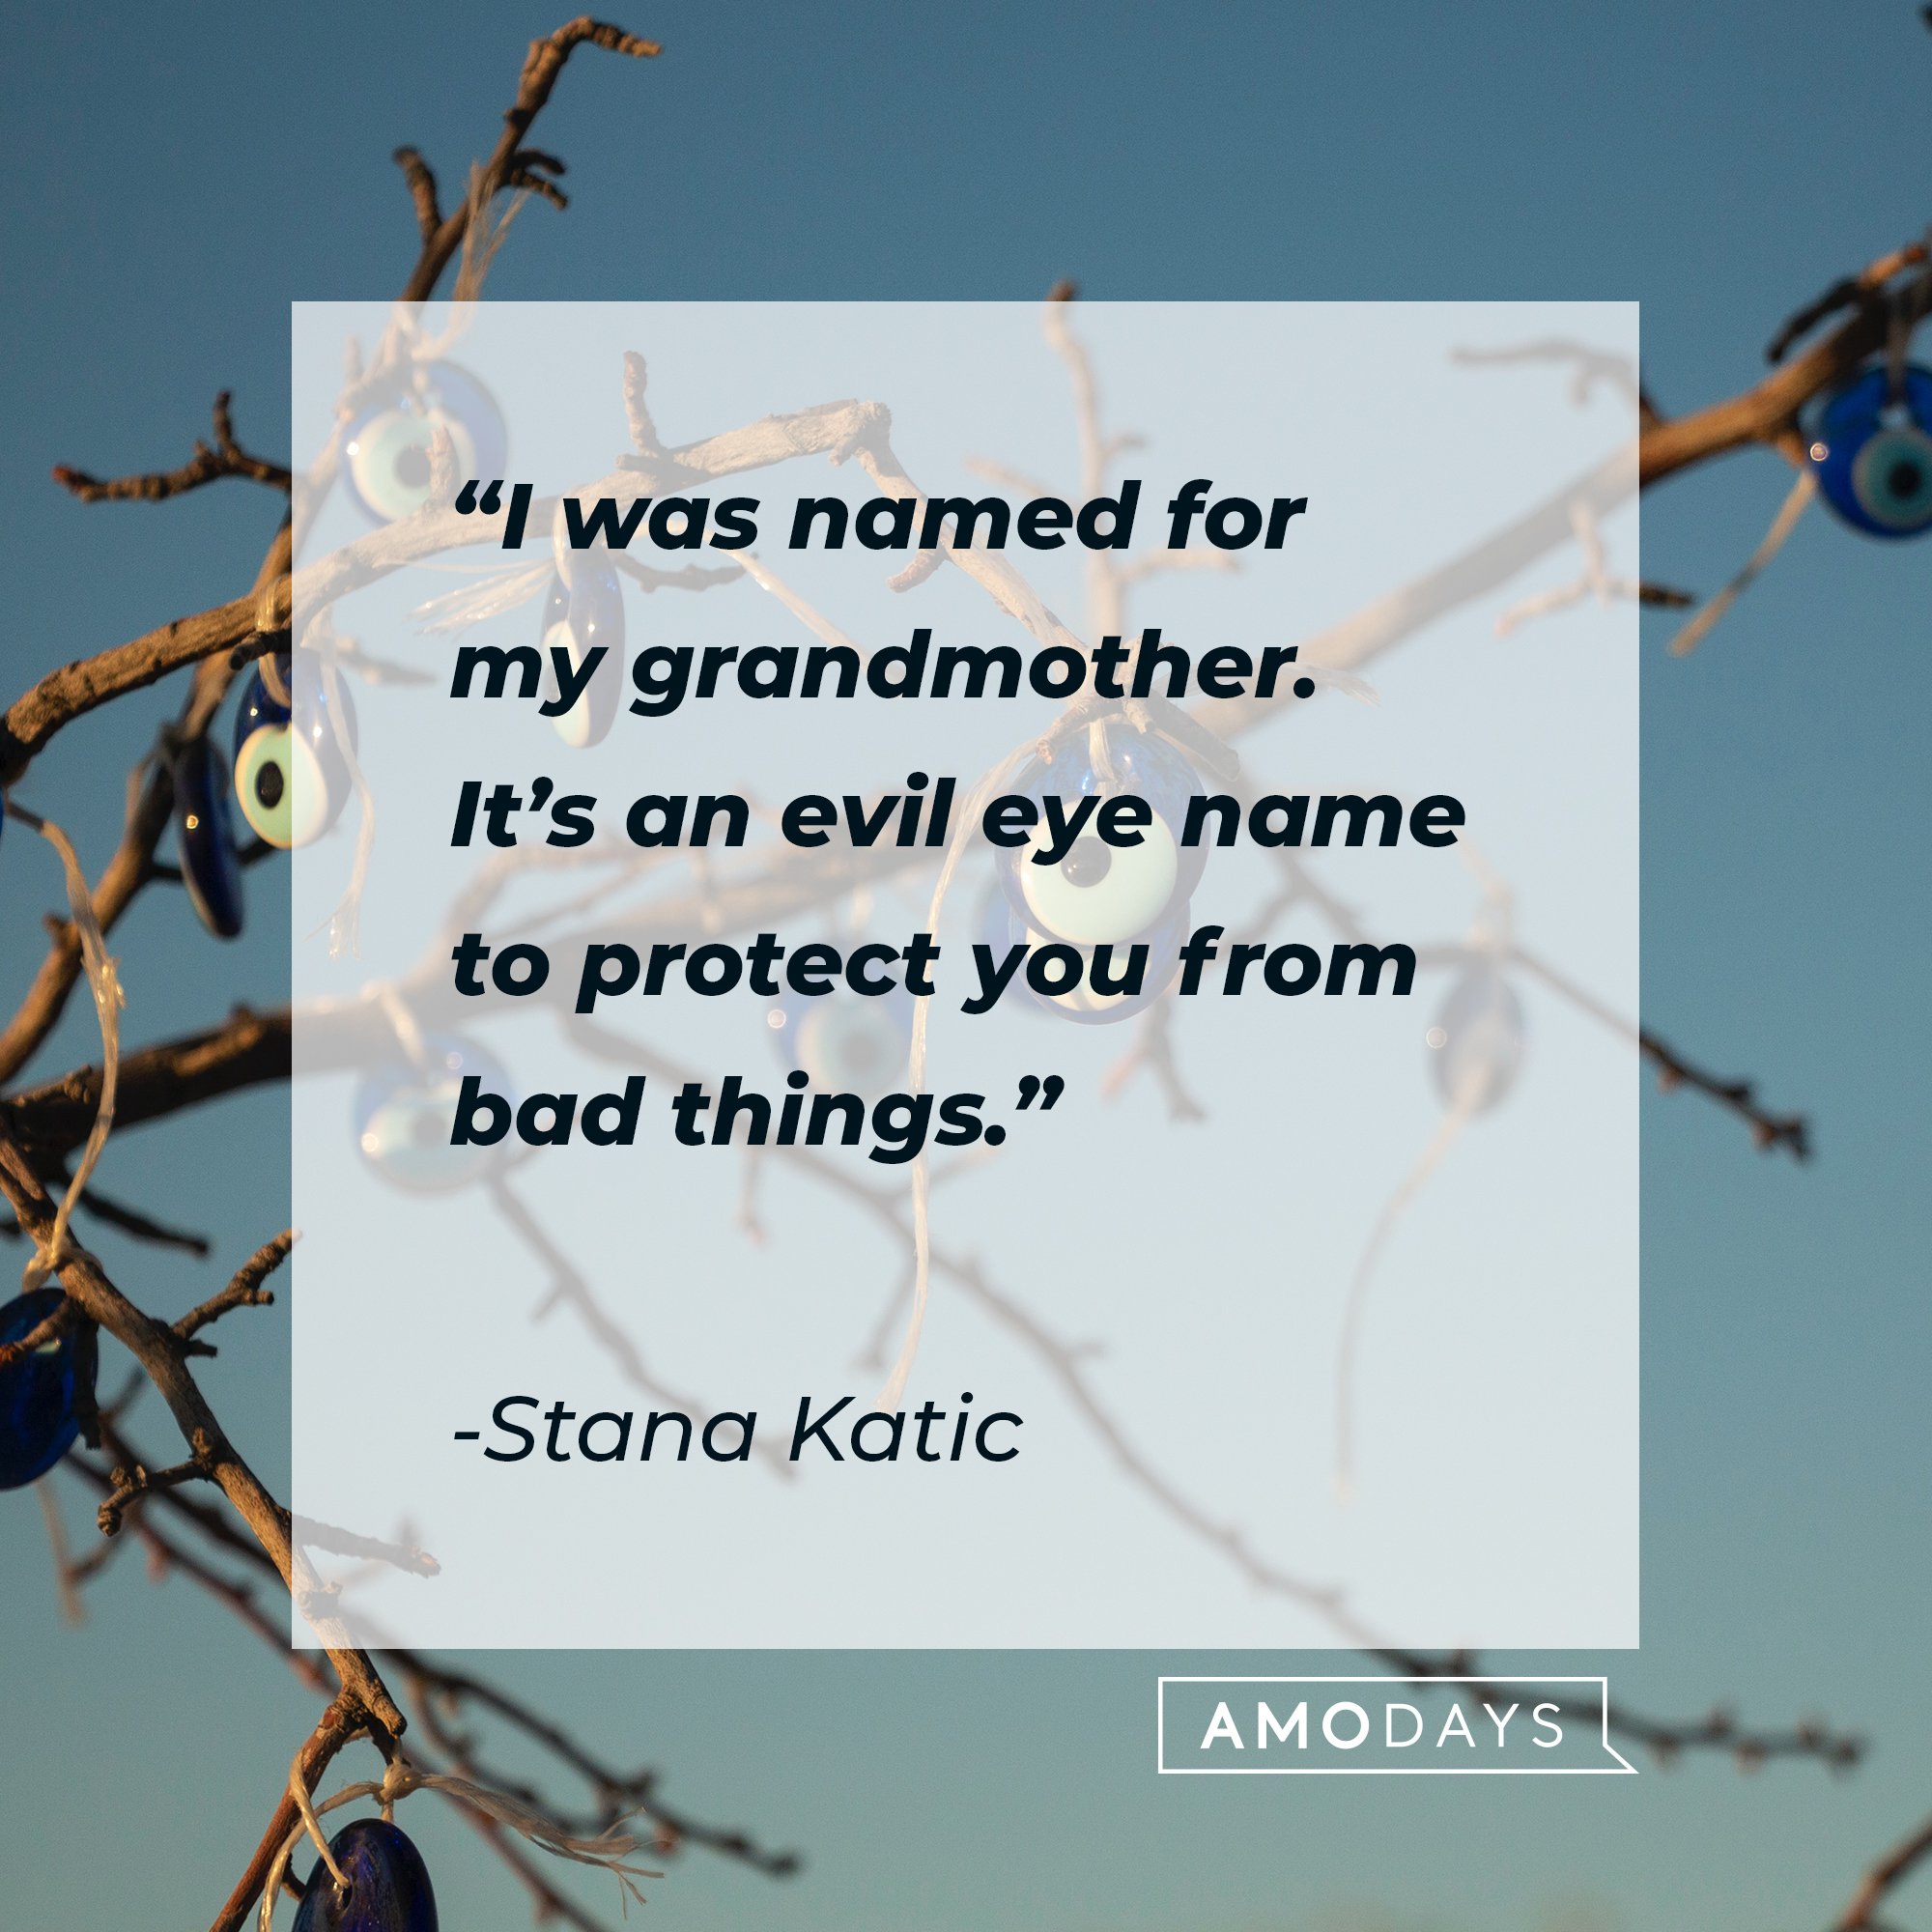 Stana Katic’s quote:  "I was named for my grandmother. It’s an evil eye name to protect you from bad things."  | Image: AmoDays